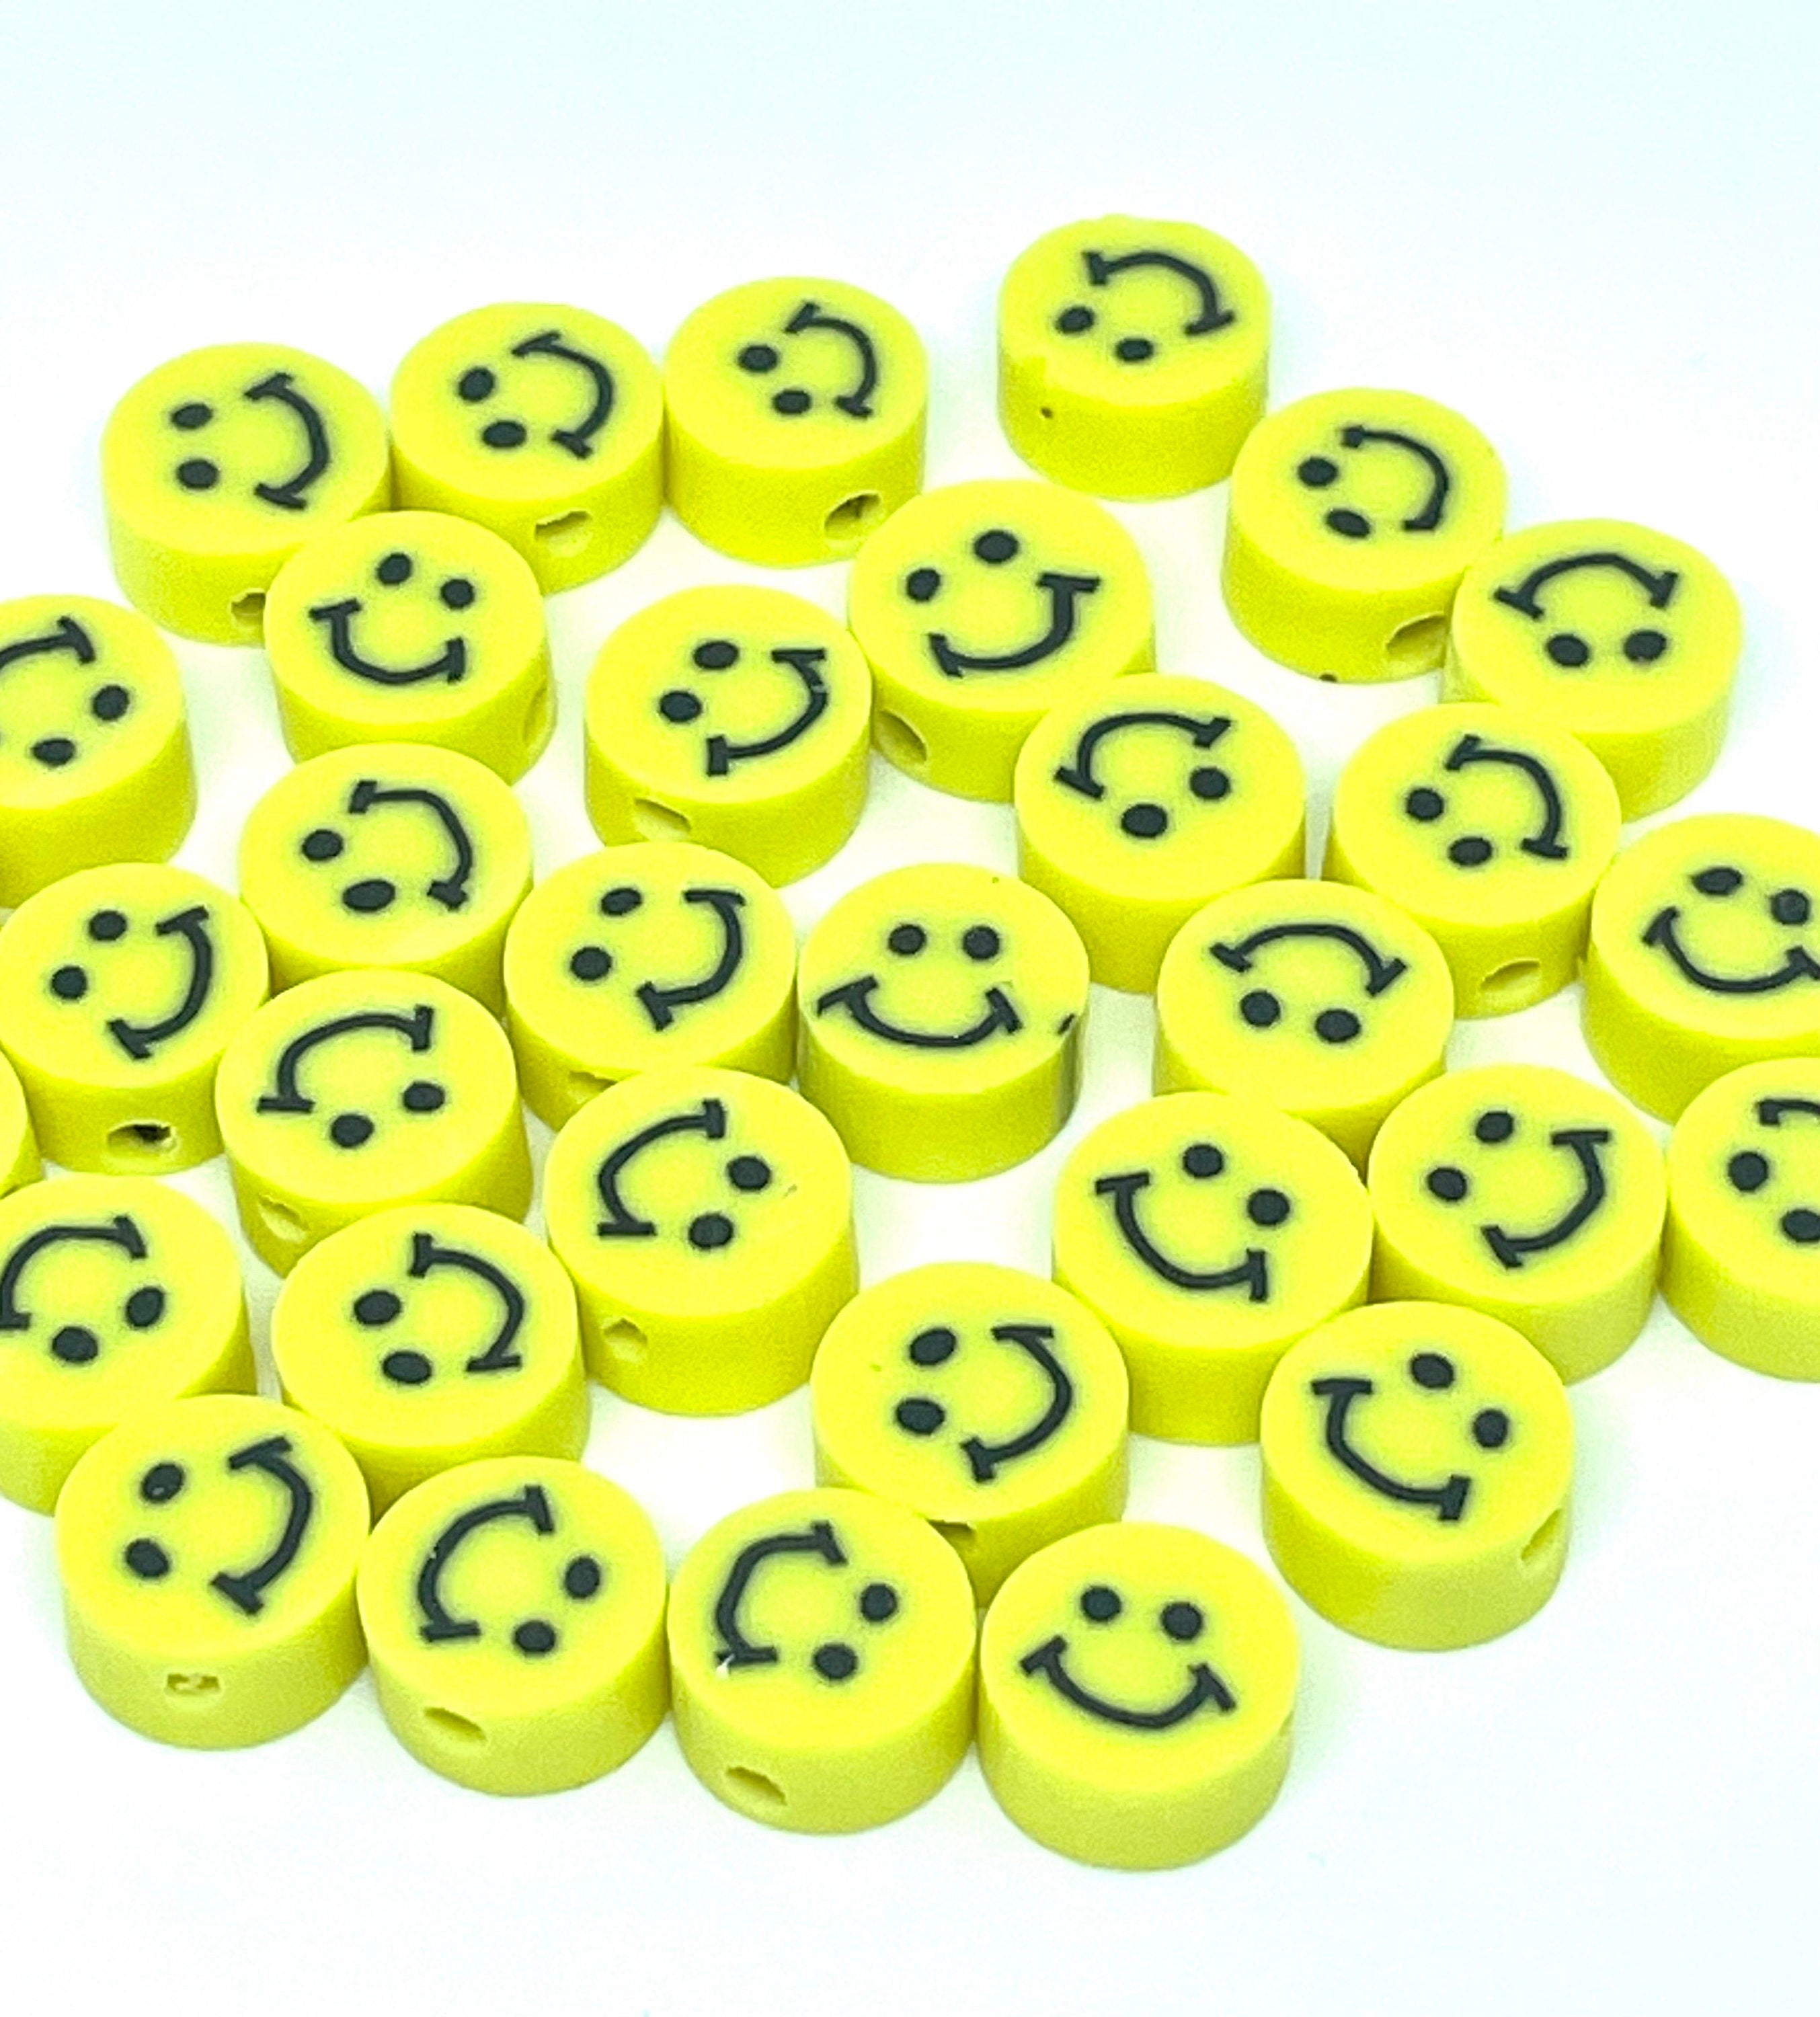 Smiley Face Beads, Emoji Beads, 10mm Polymer Clay Beads, Yellow Beads